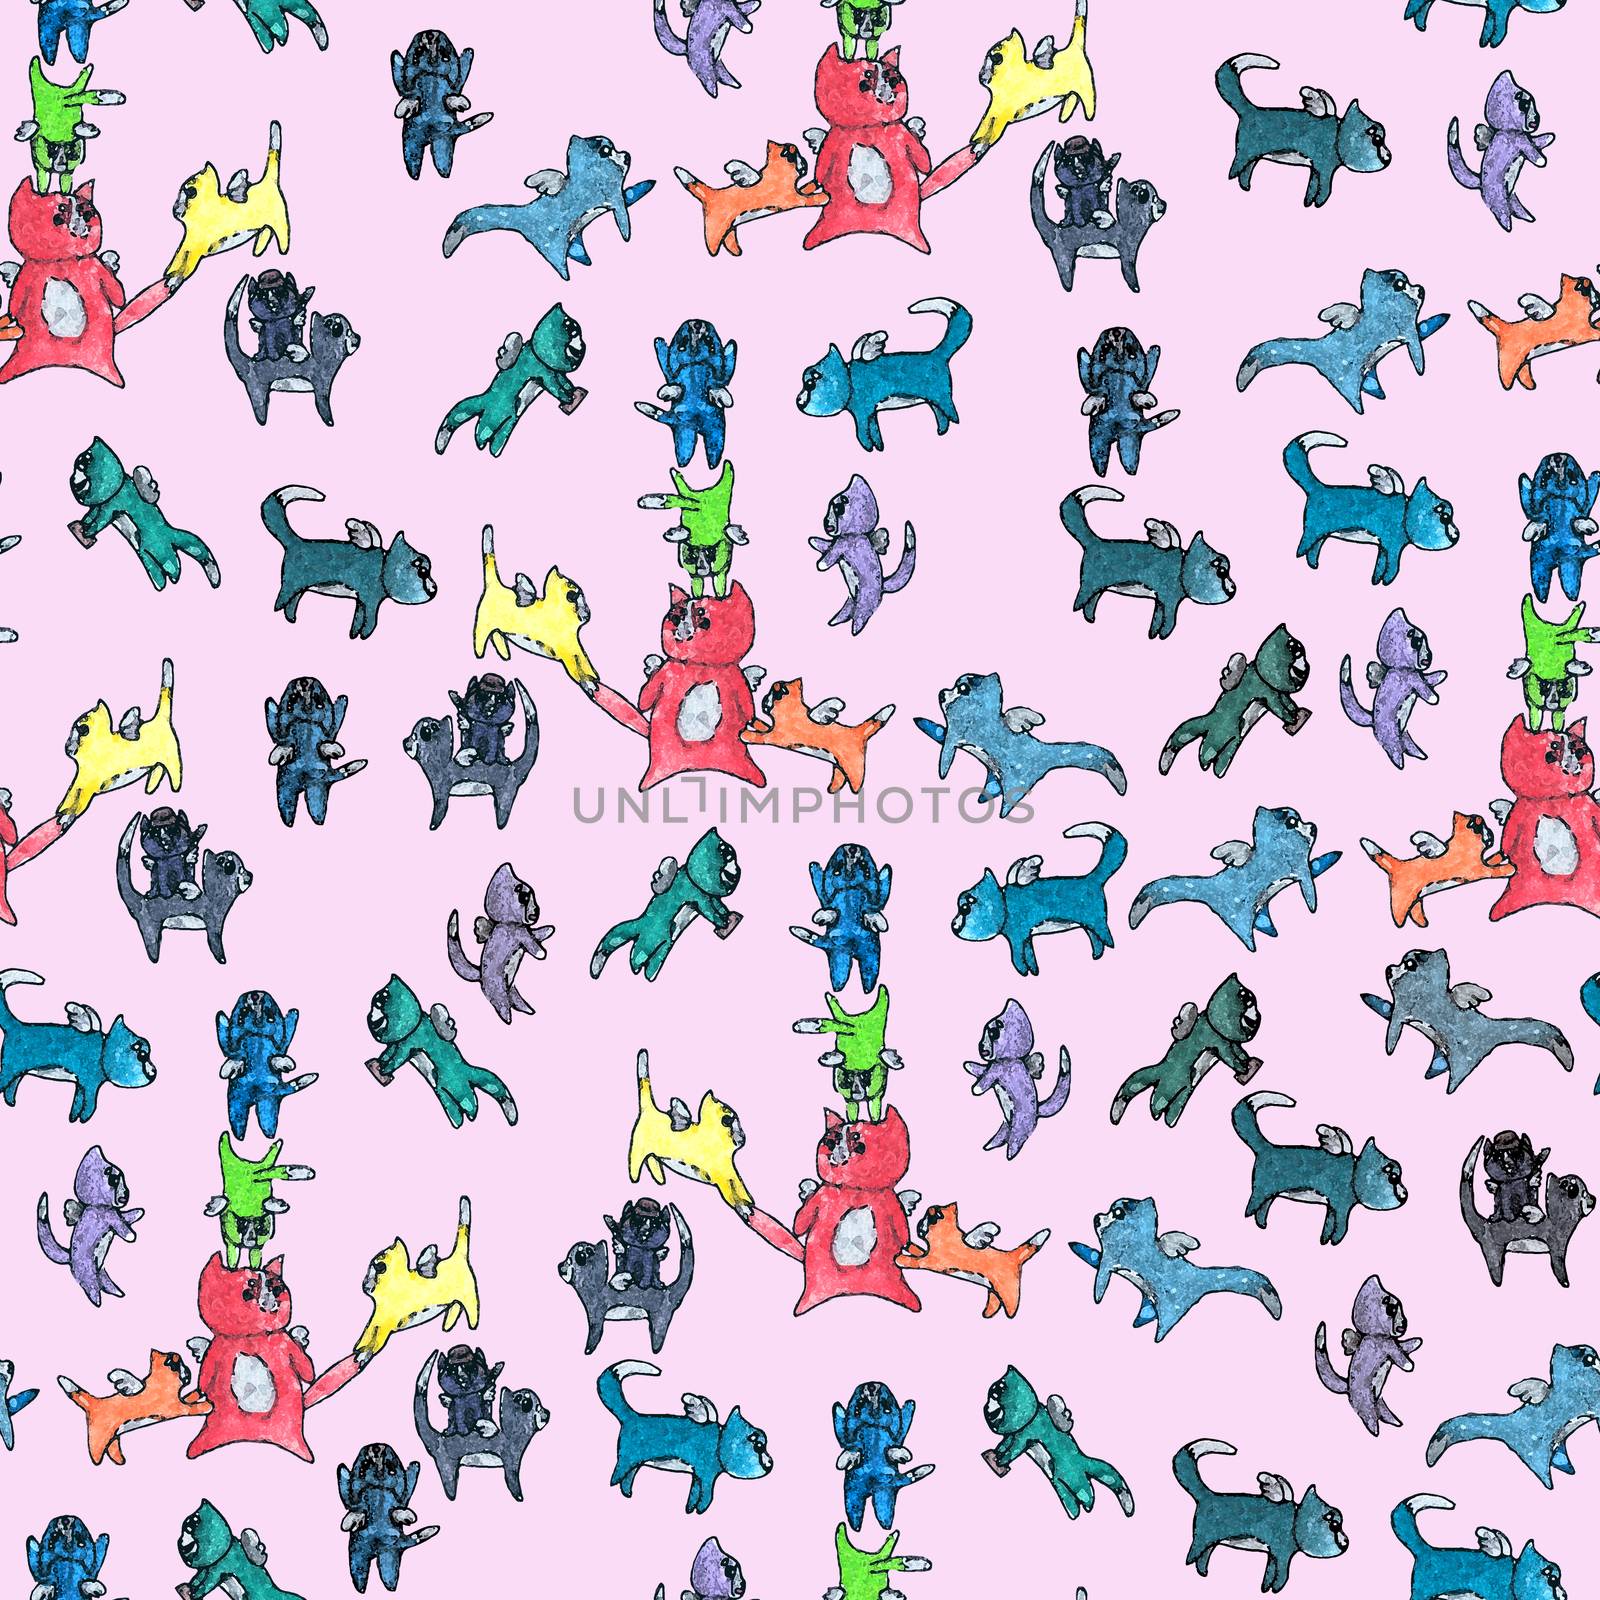 Watercolor Pattern of Flying Cats on Pink Background